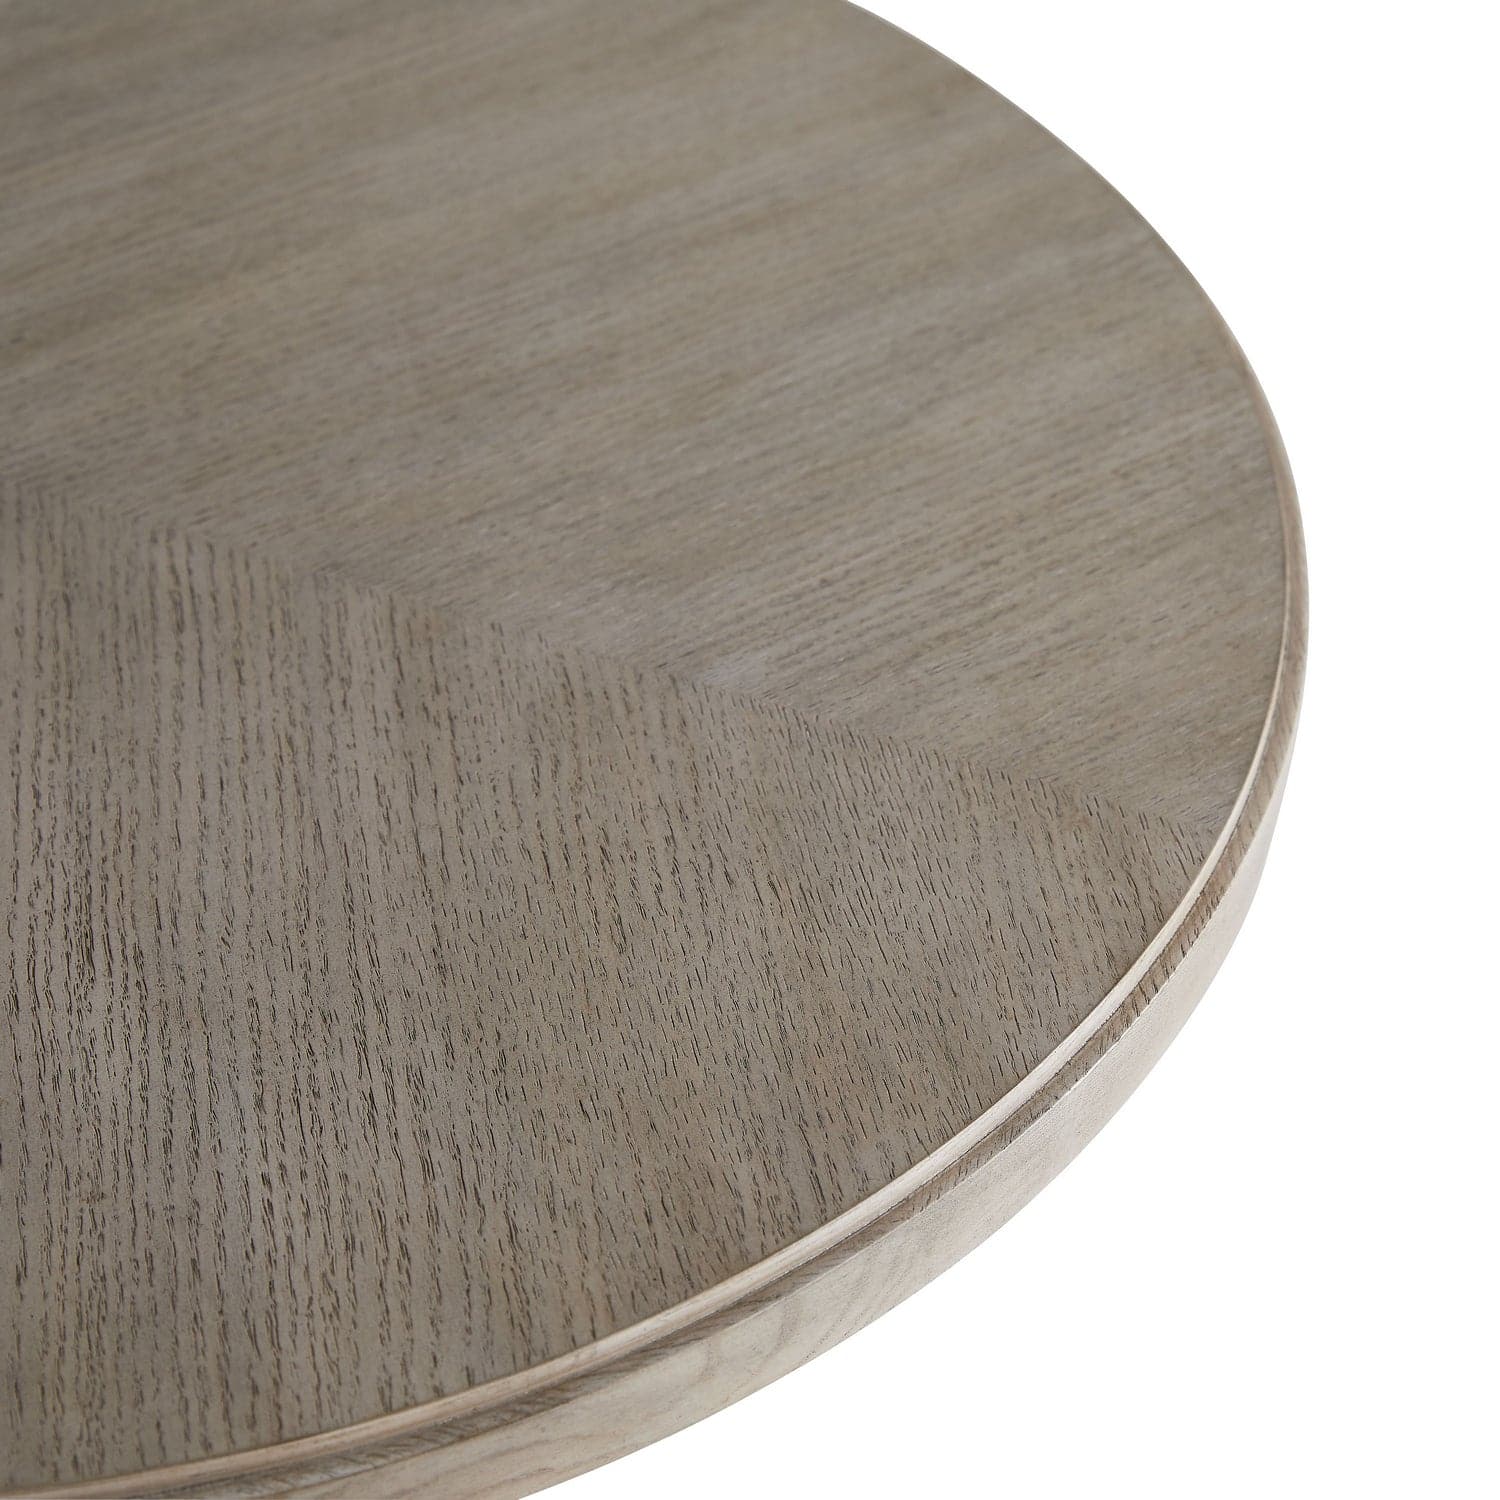 End Table from the Dorey collection in Smoke finish